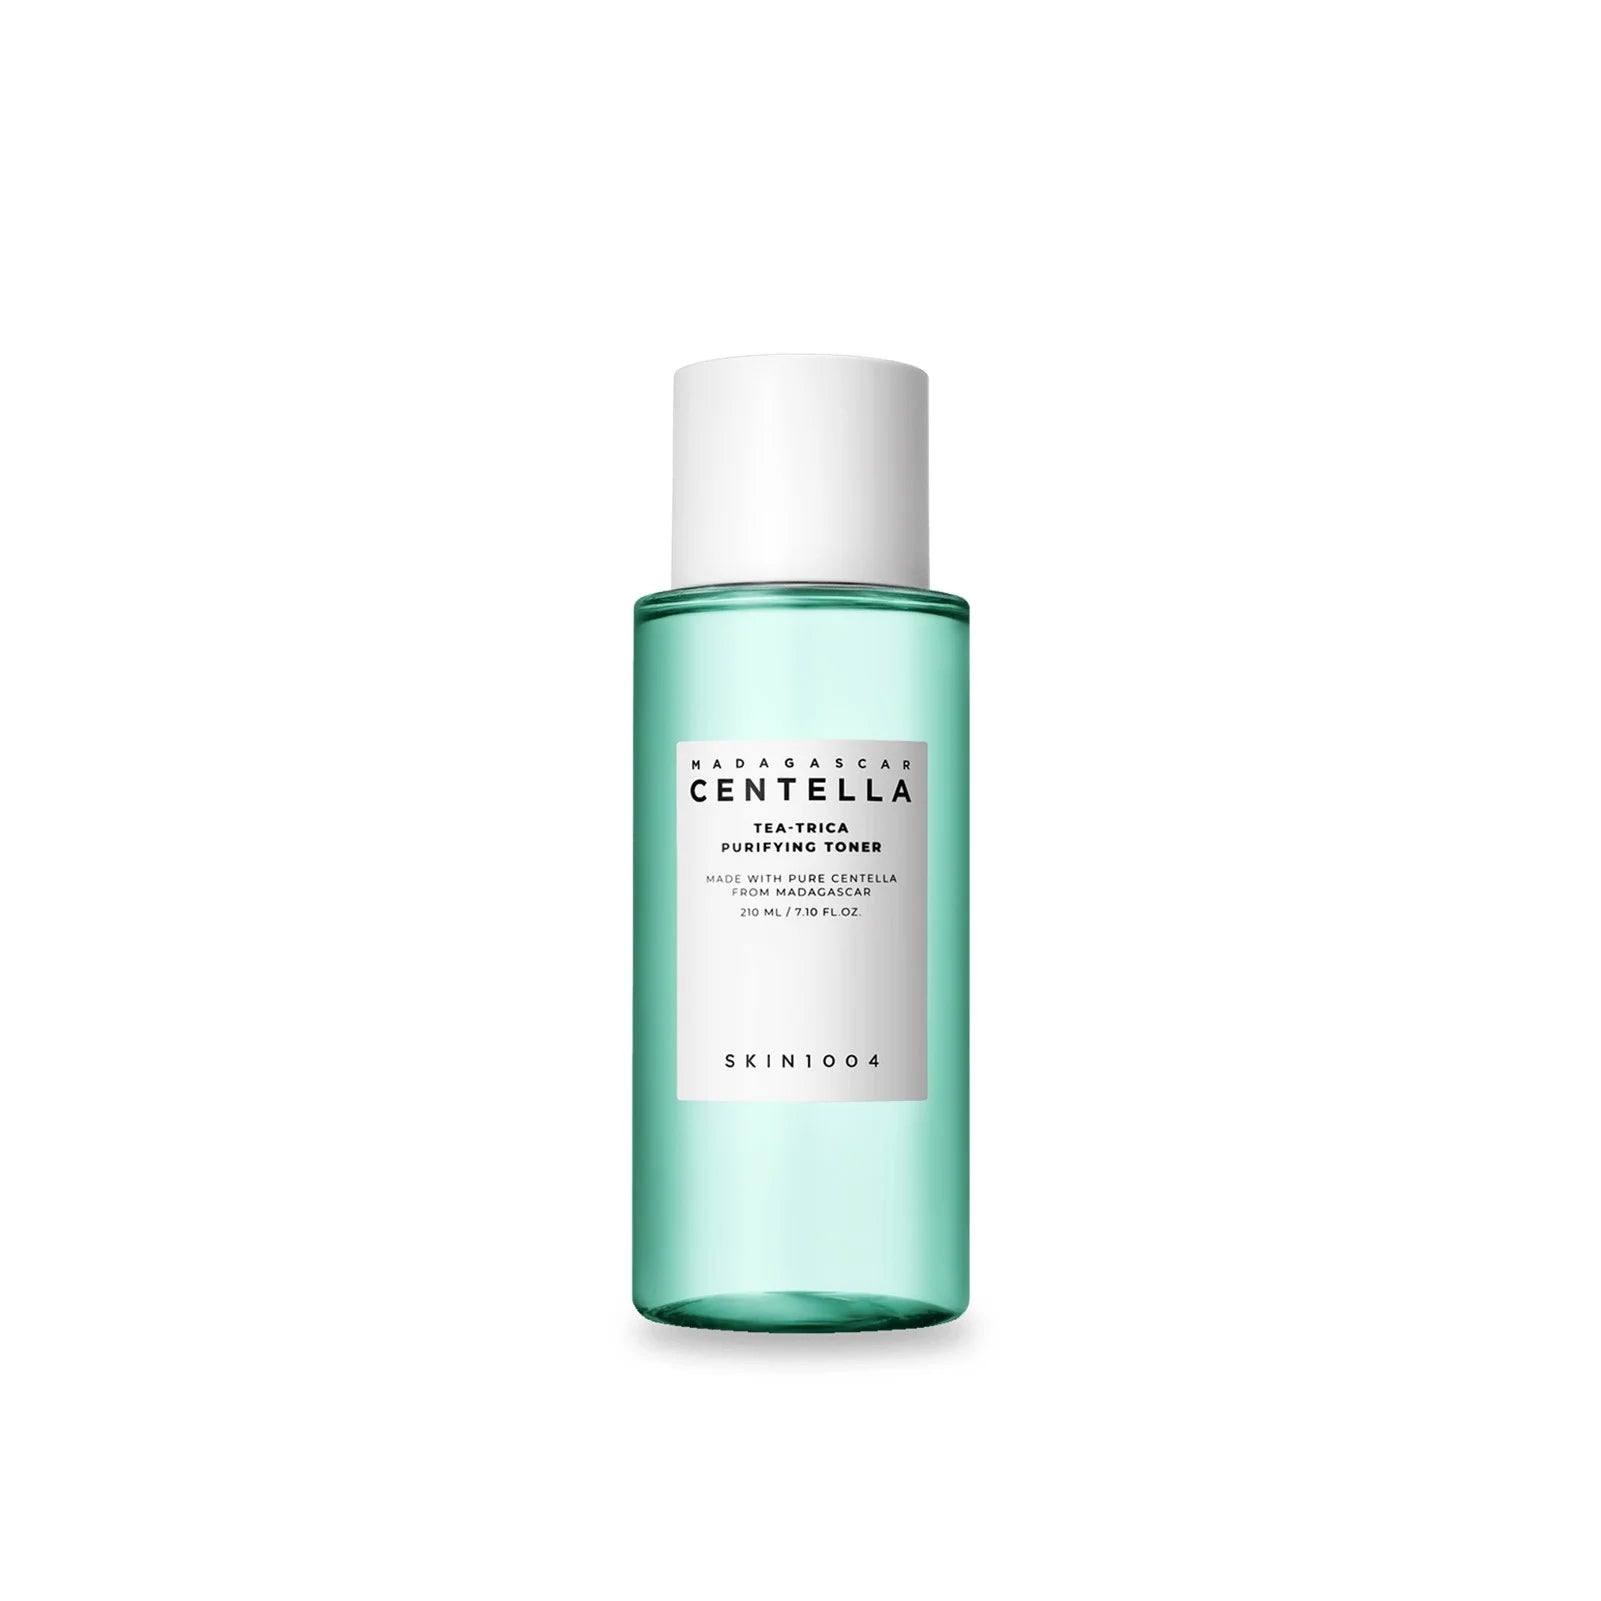 SKIN1004 Madagascar Centella Tea-Trica Purifying Toner 210ml bottle with green and white label.